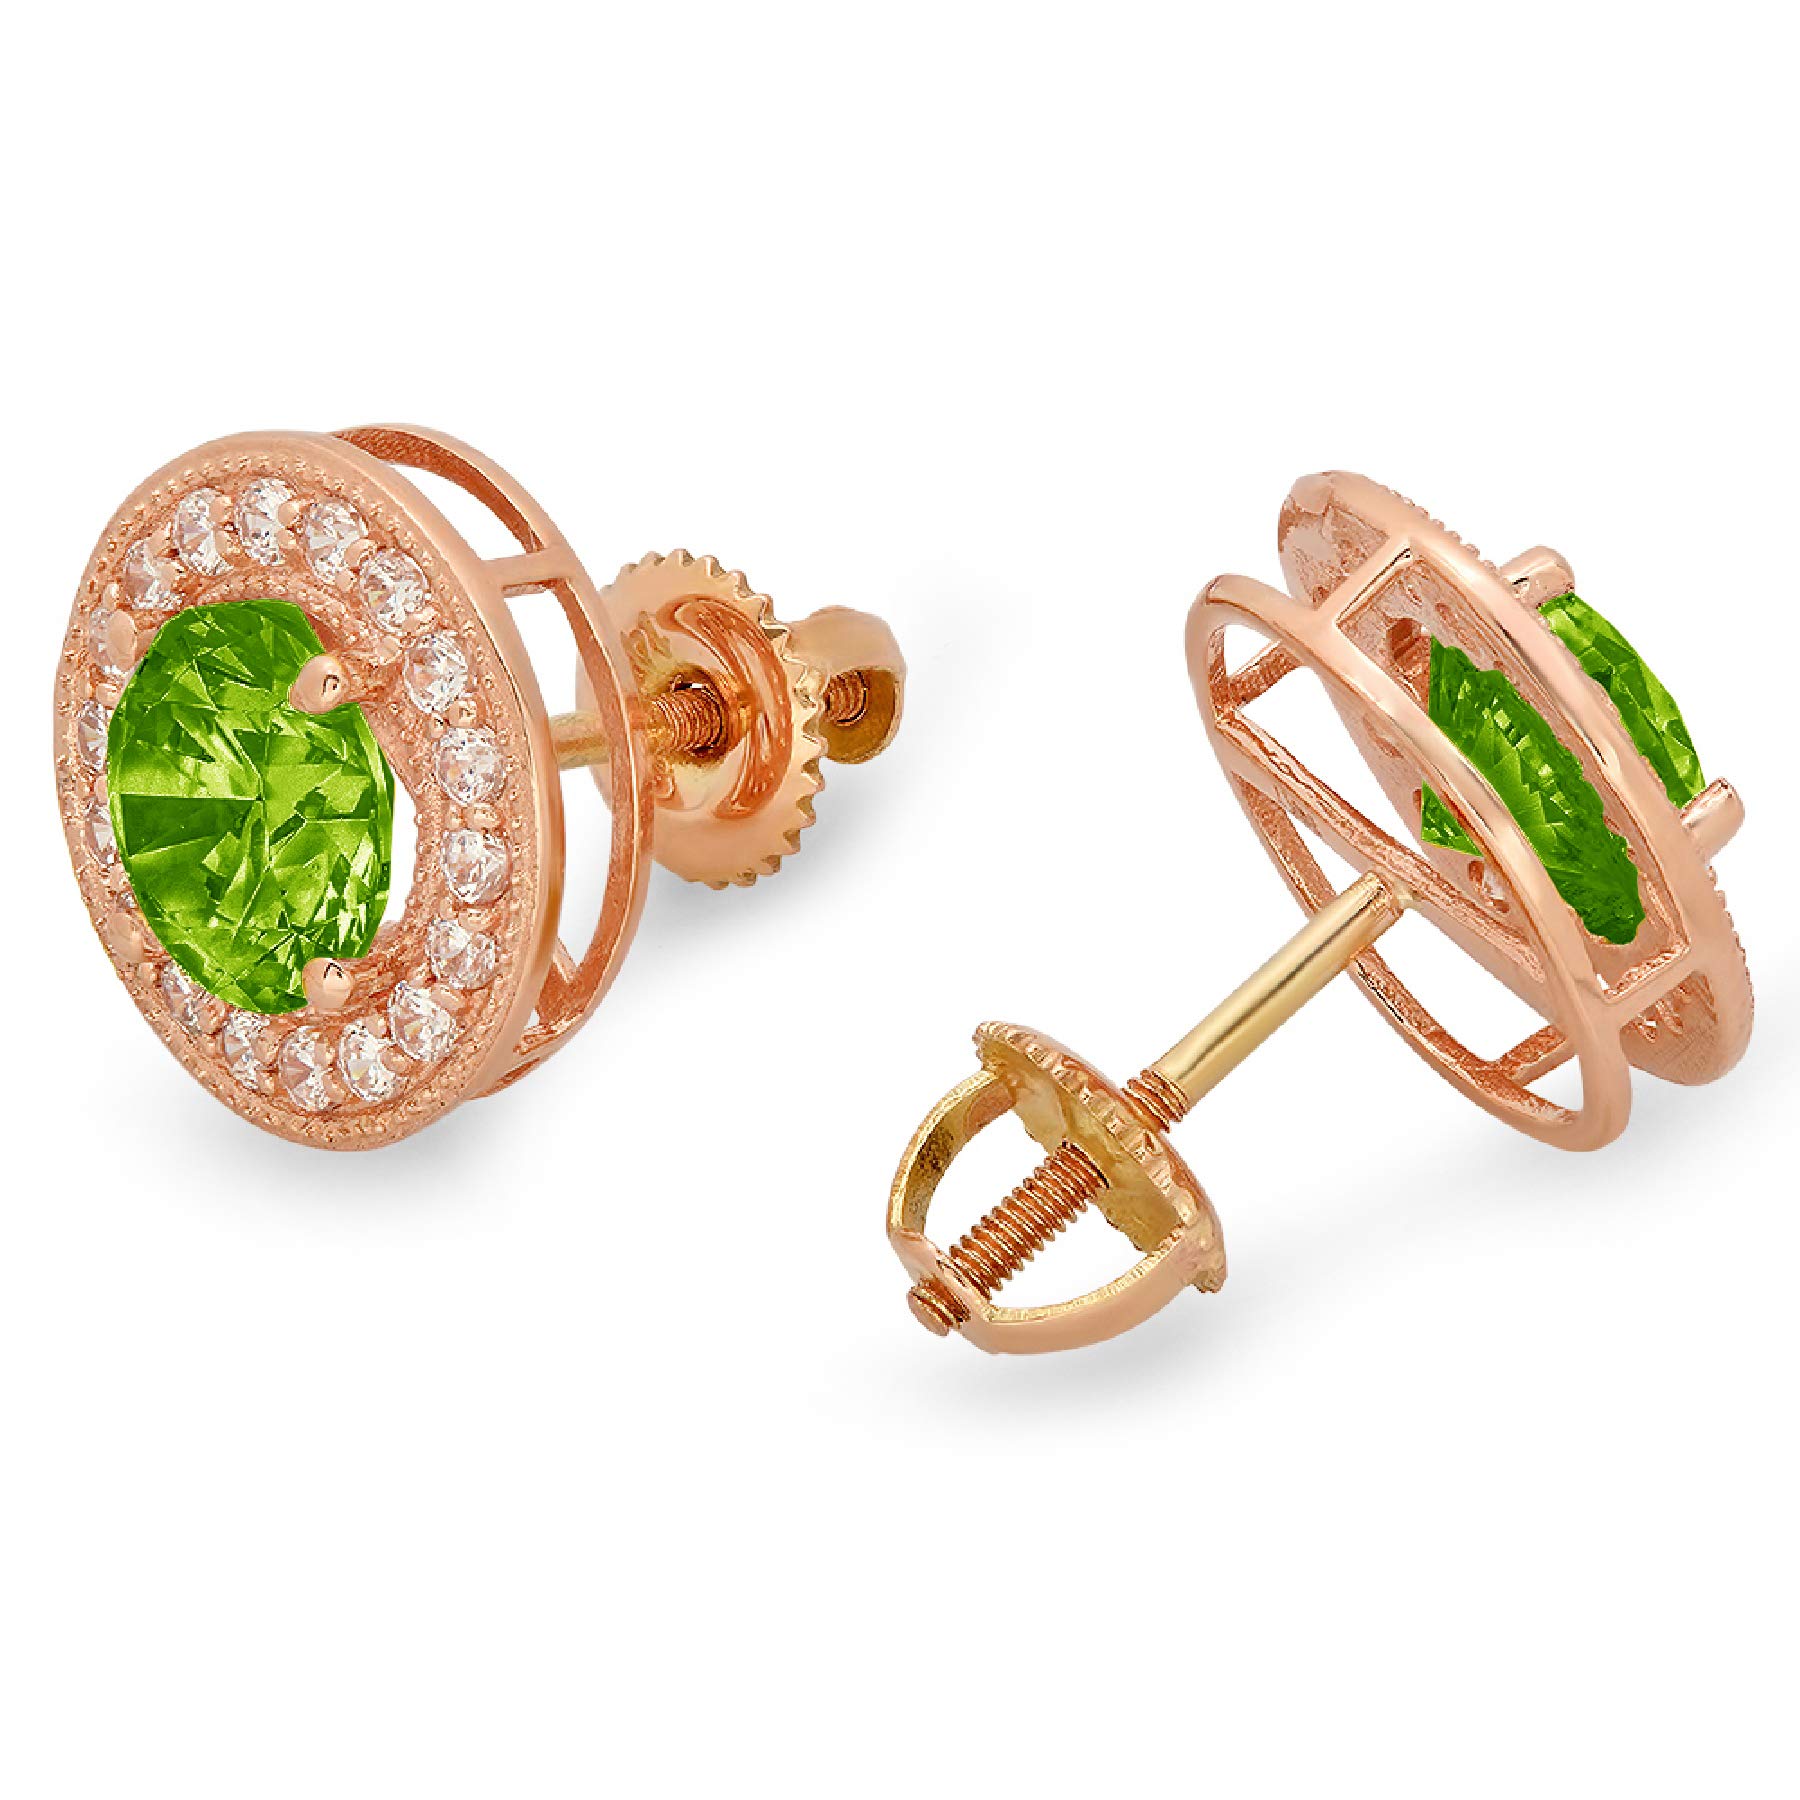 Clara Pucci 3.7 ct Brilliant Round Cut Halo Solitaire VVS1 Flawless Natural Green Peridot Gemstone Pair of Solitaire Stud Screw Back Earrings Solid 18K Rose Gold